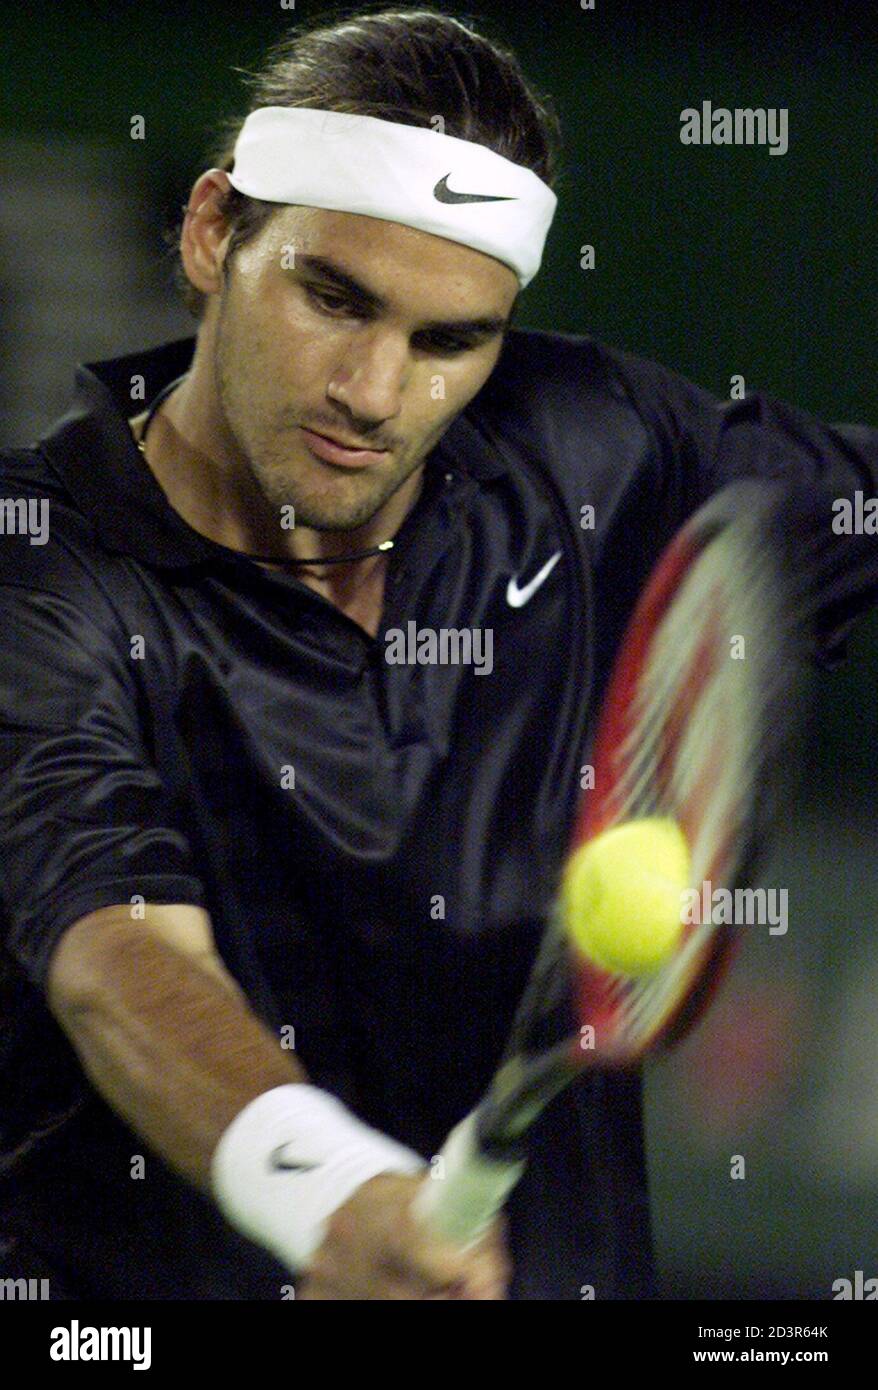 Switzerland's Roger Federer plays a backhand during his fourth round match  against Germany's Tommy Haas at the Australian Open in Melbourne January  21, 2002. Haas won in five sets 7-6 4-6 3-6